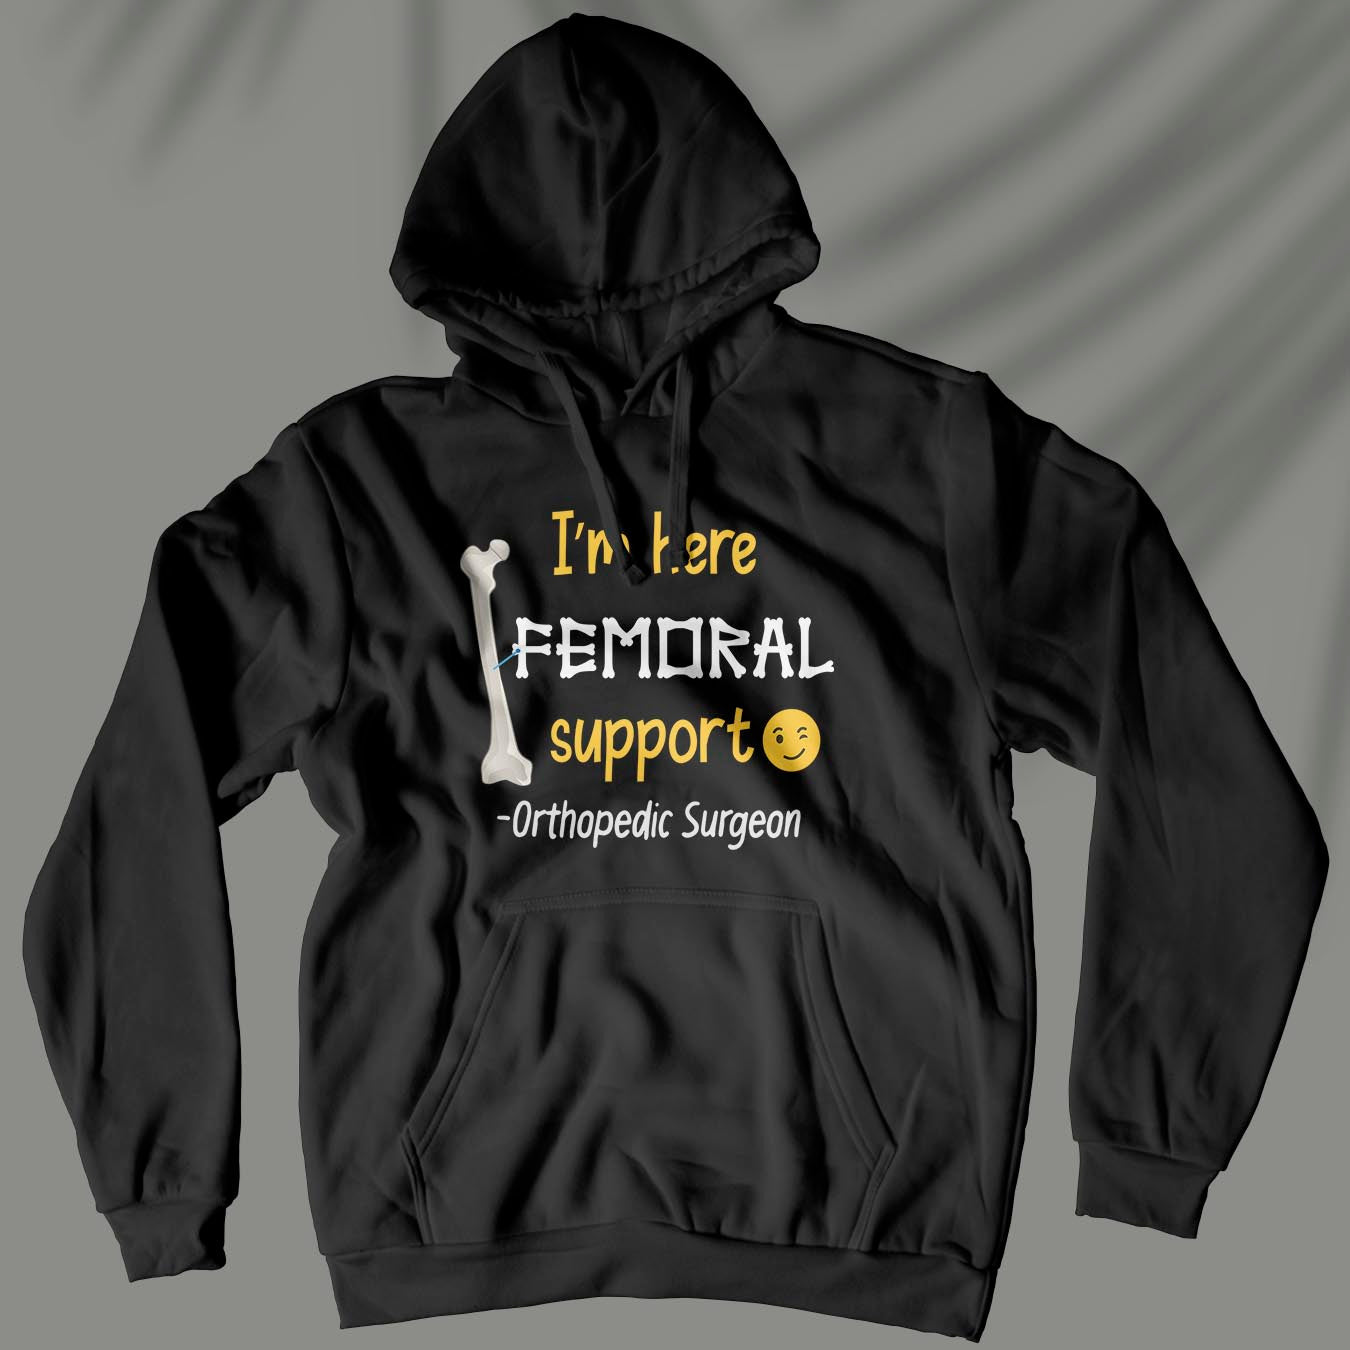 For Moral Support - Unisex Hoodie